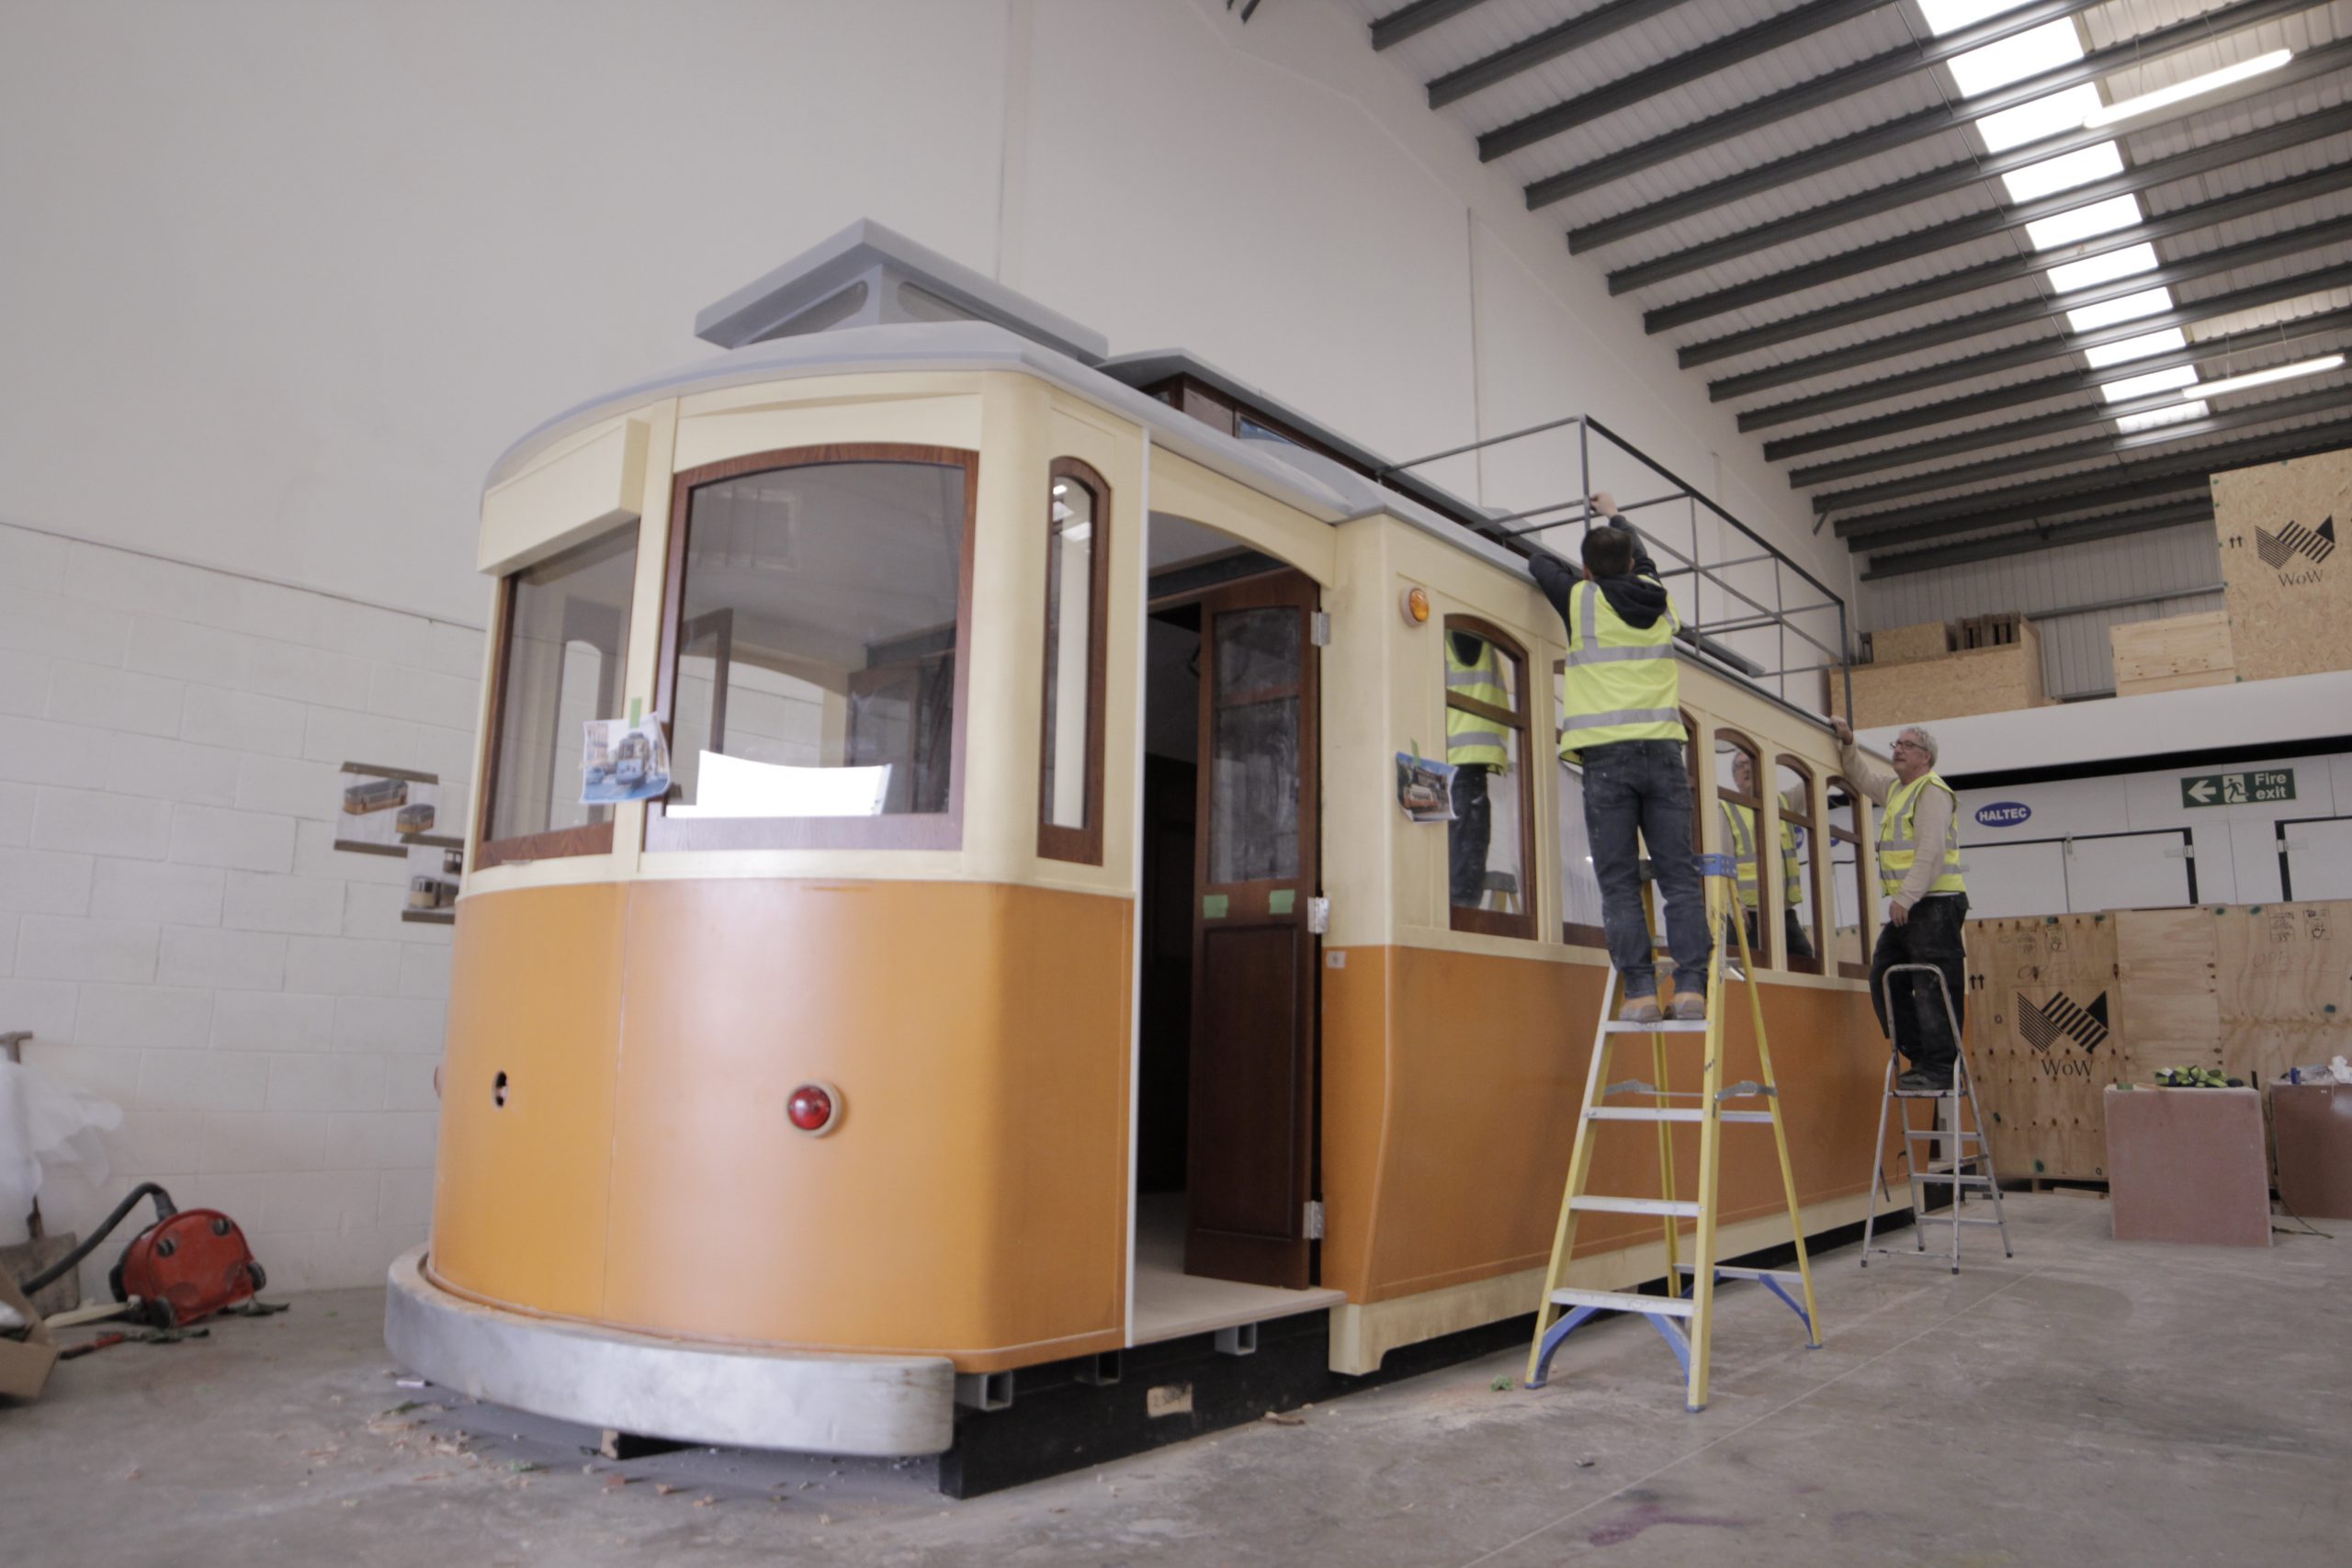 People constructing an orange carriage